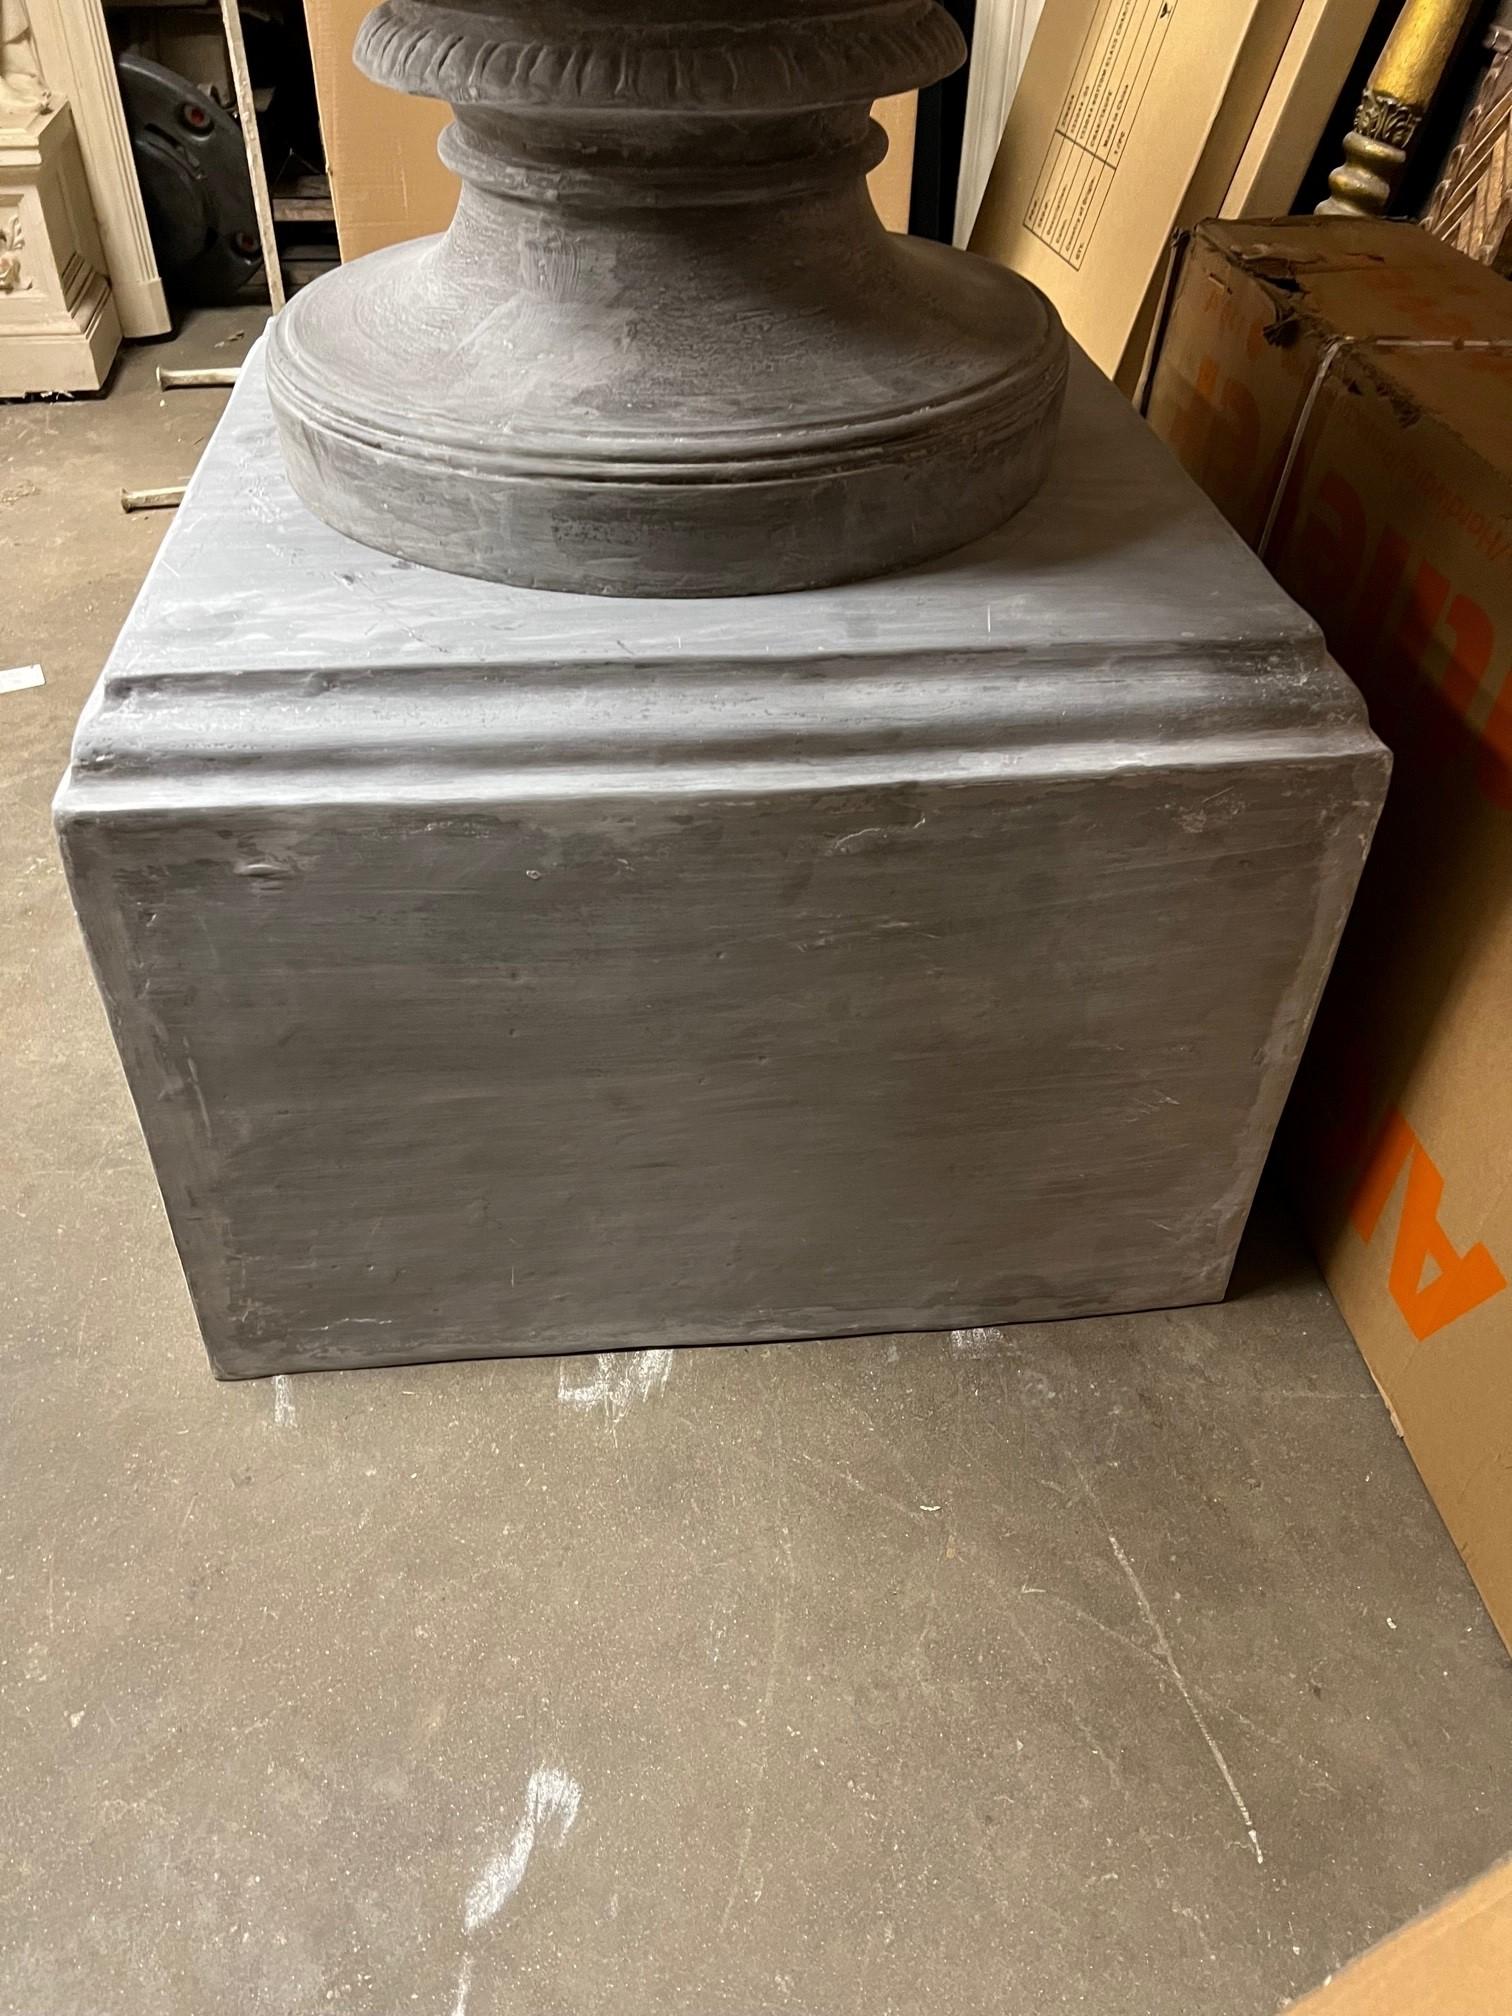 Monumental Reproduction Fiberglass Urn with Large Handles on a Pedestal  For Sale 9